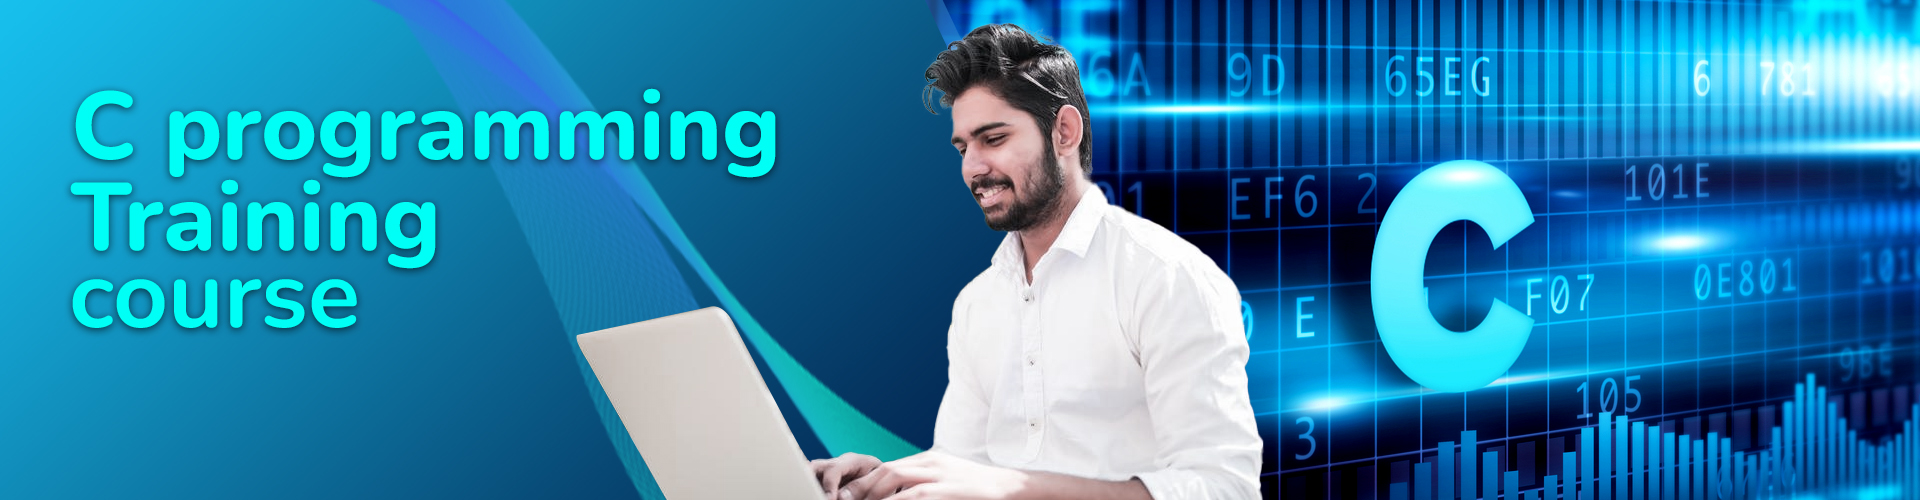 C Programming Online Course with Certificate